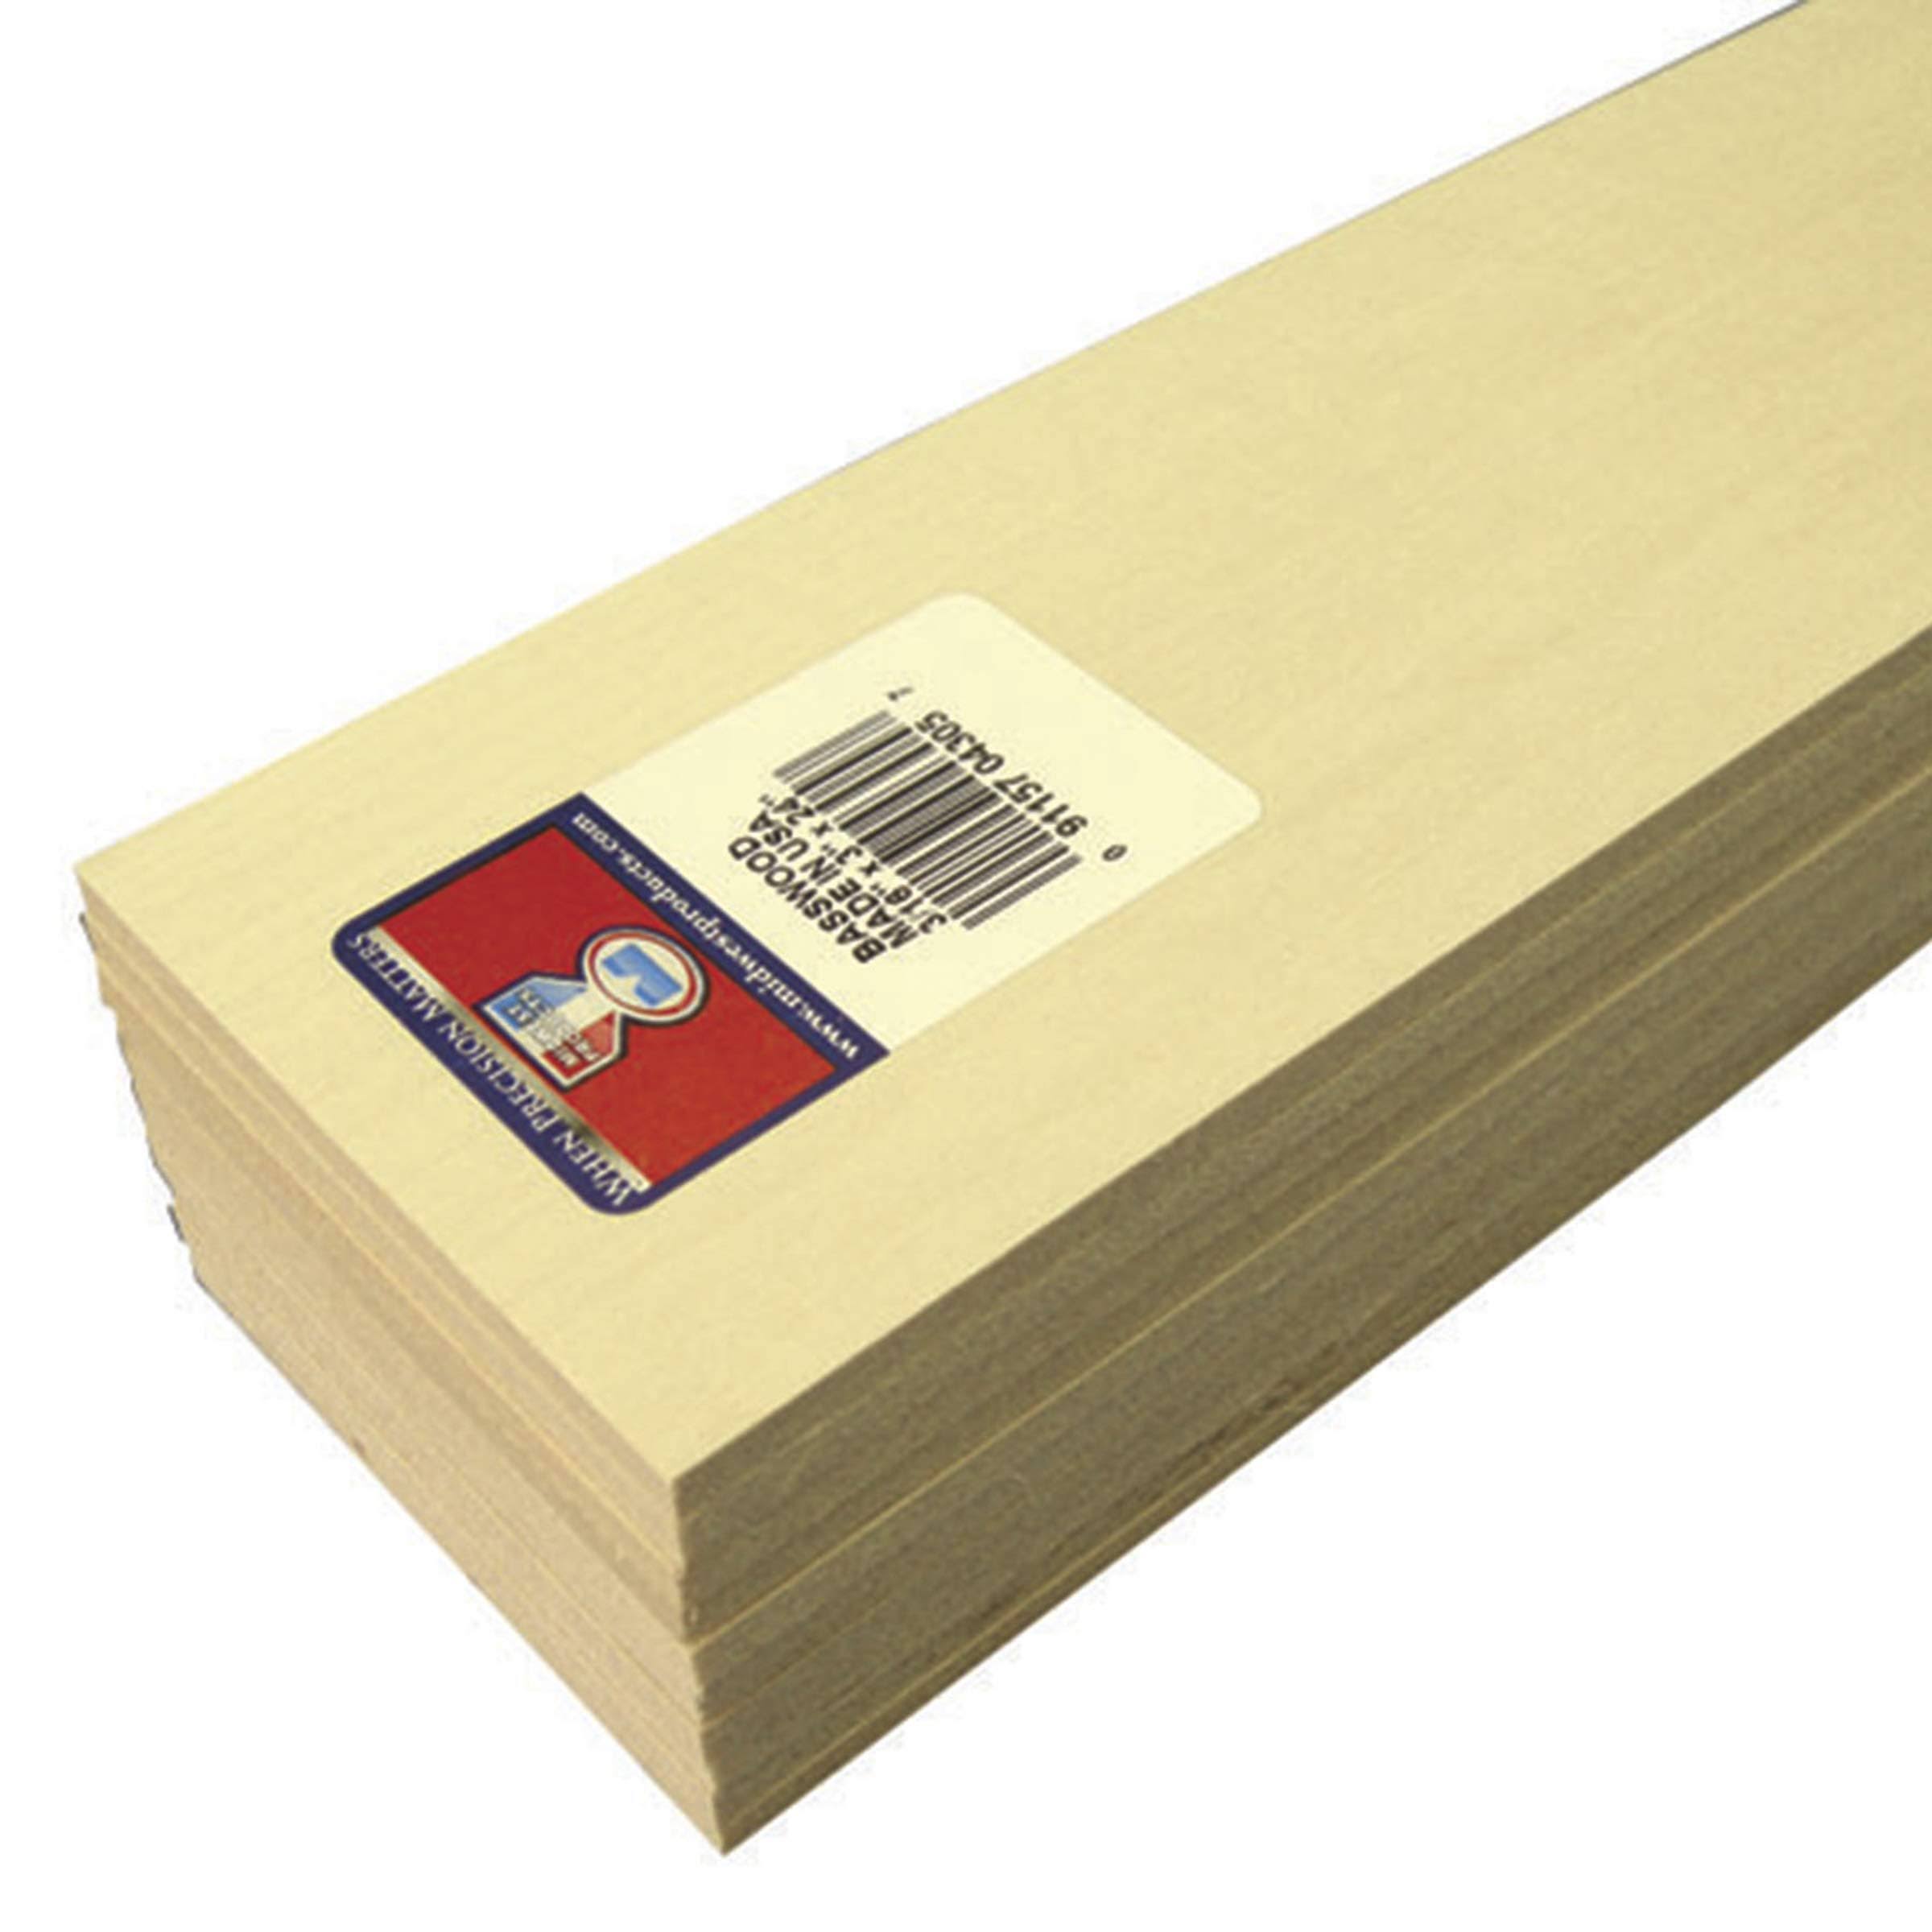 MIDWEST PRODUCTS 4305 BASSWOOD SHEET 3/16X3X24